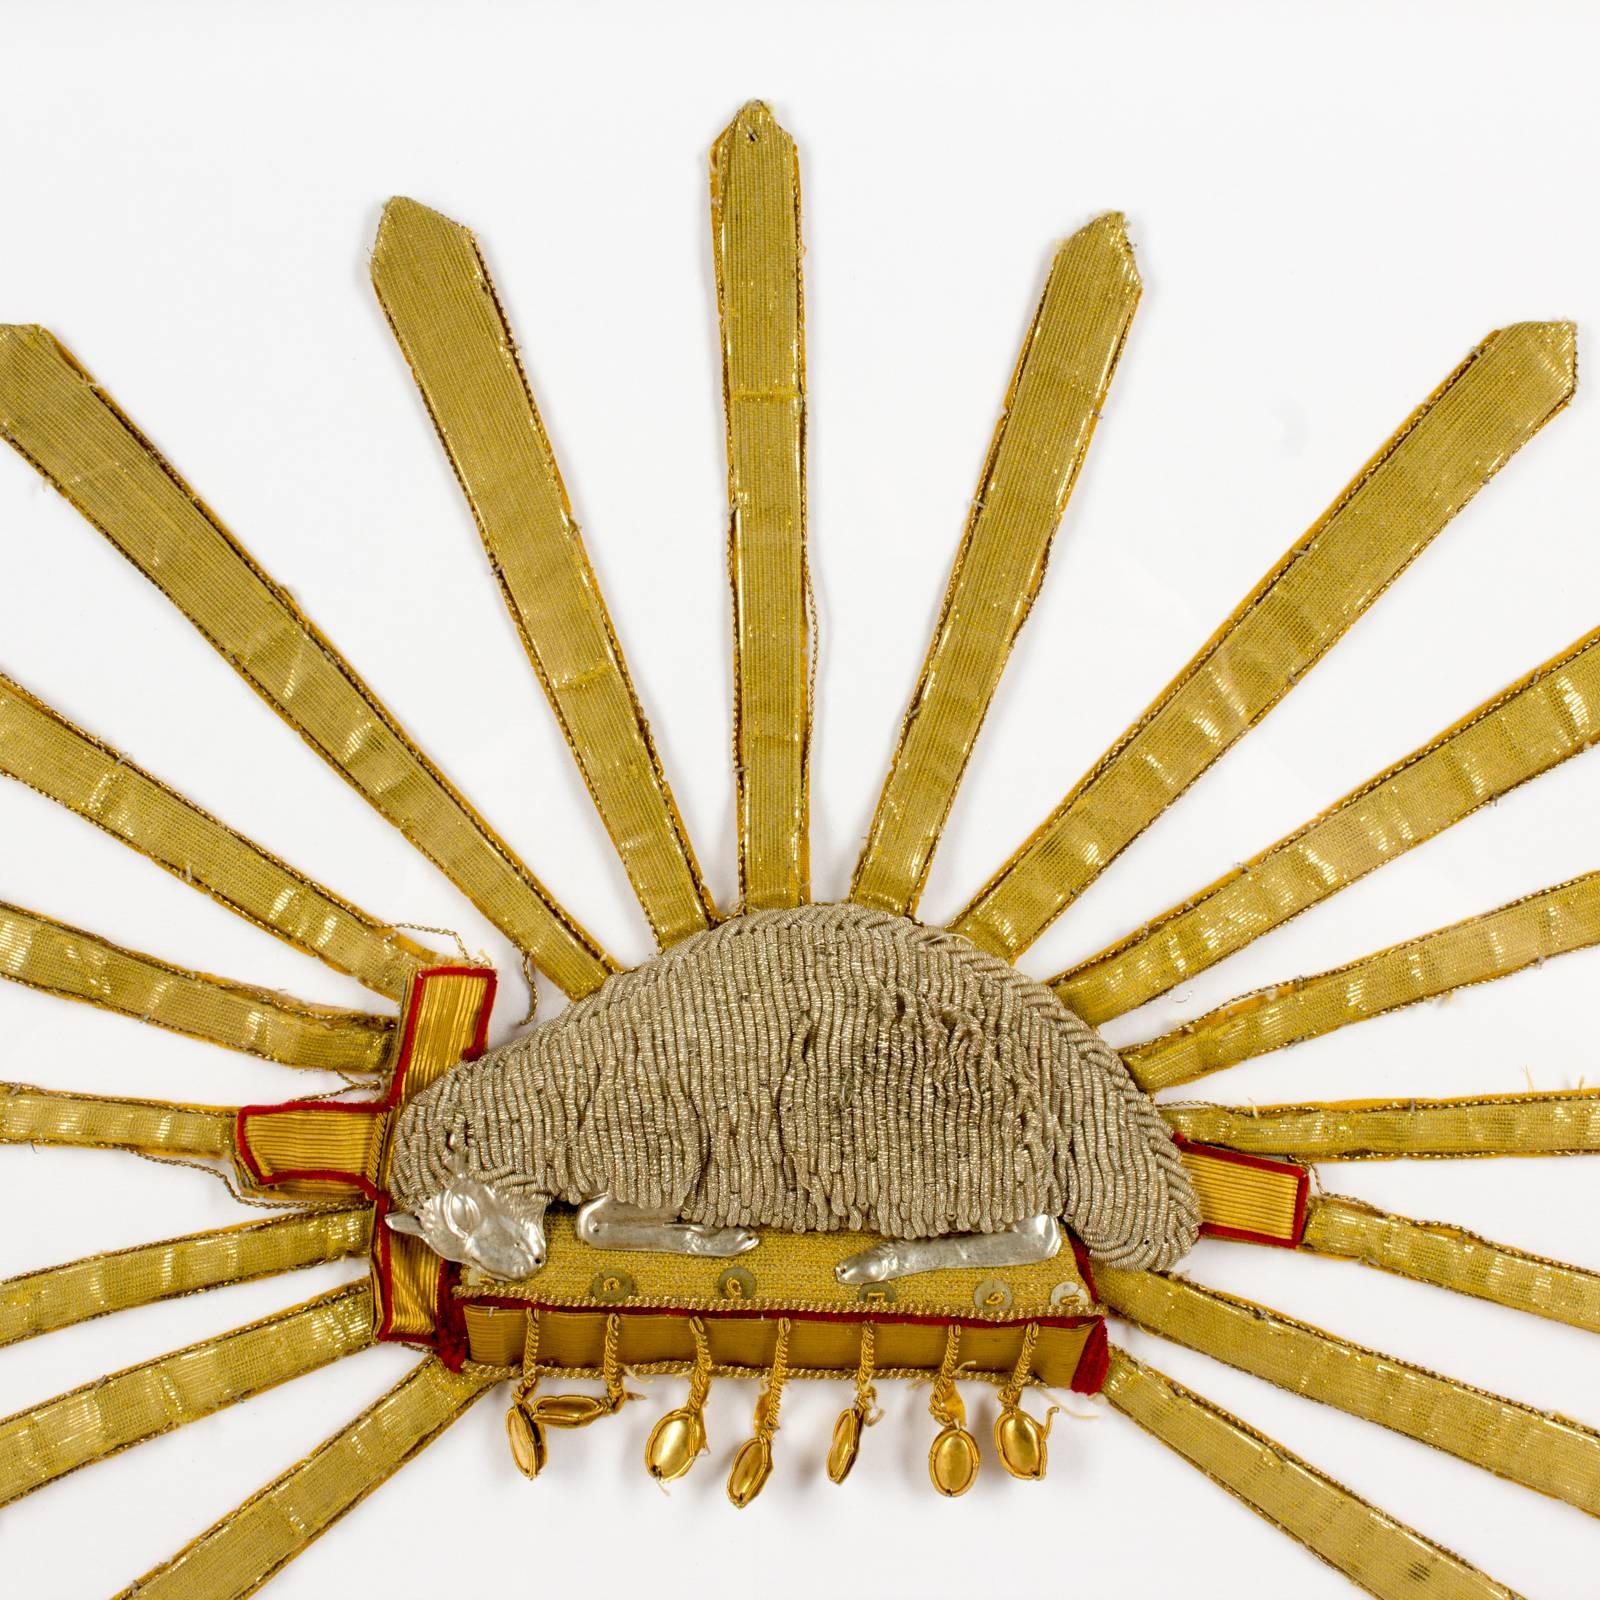 This beautifully made antique (late 1800s) textile fragment features an embroidered image of the Lamb of God, a symbol for Christ, surrounded by light. The embroidery is not flat, but rather three-dimensional. We believe this particular fragment was